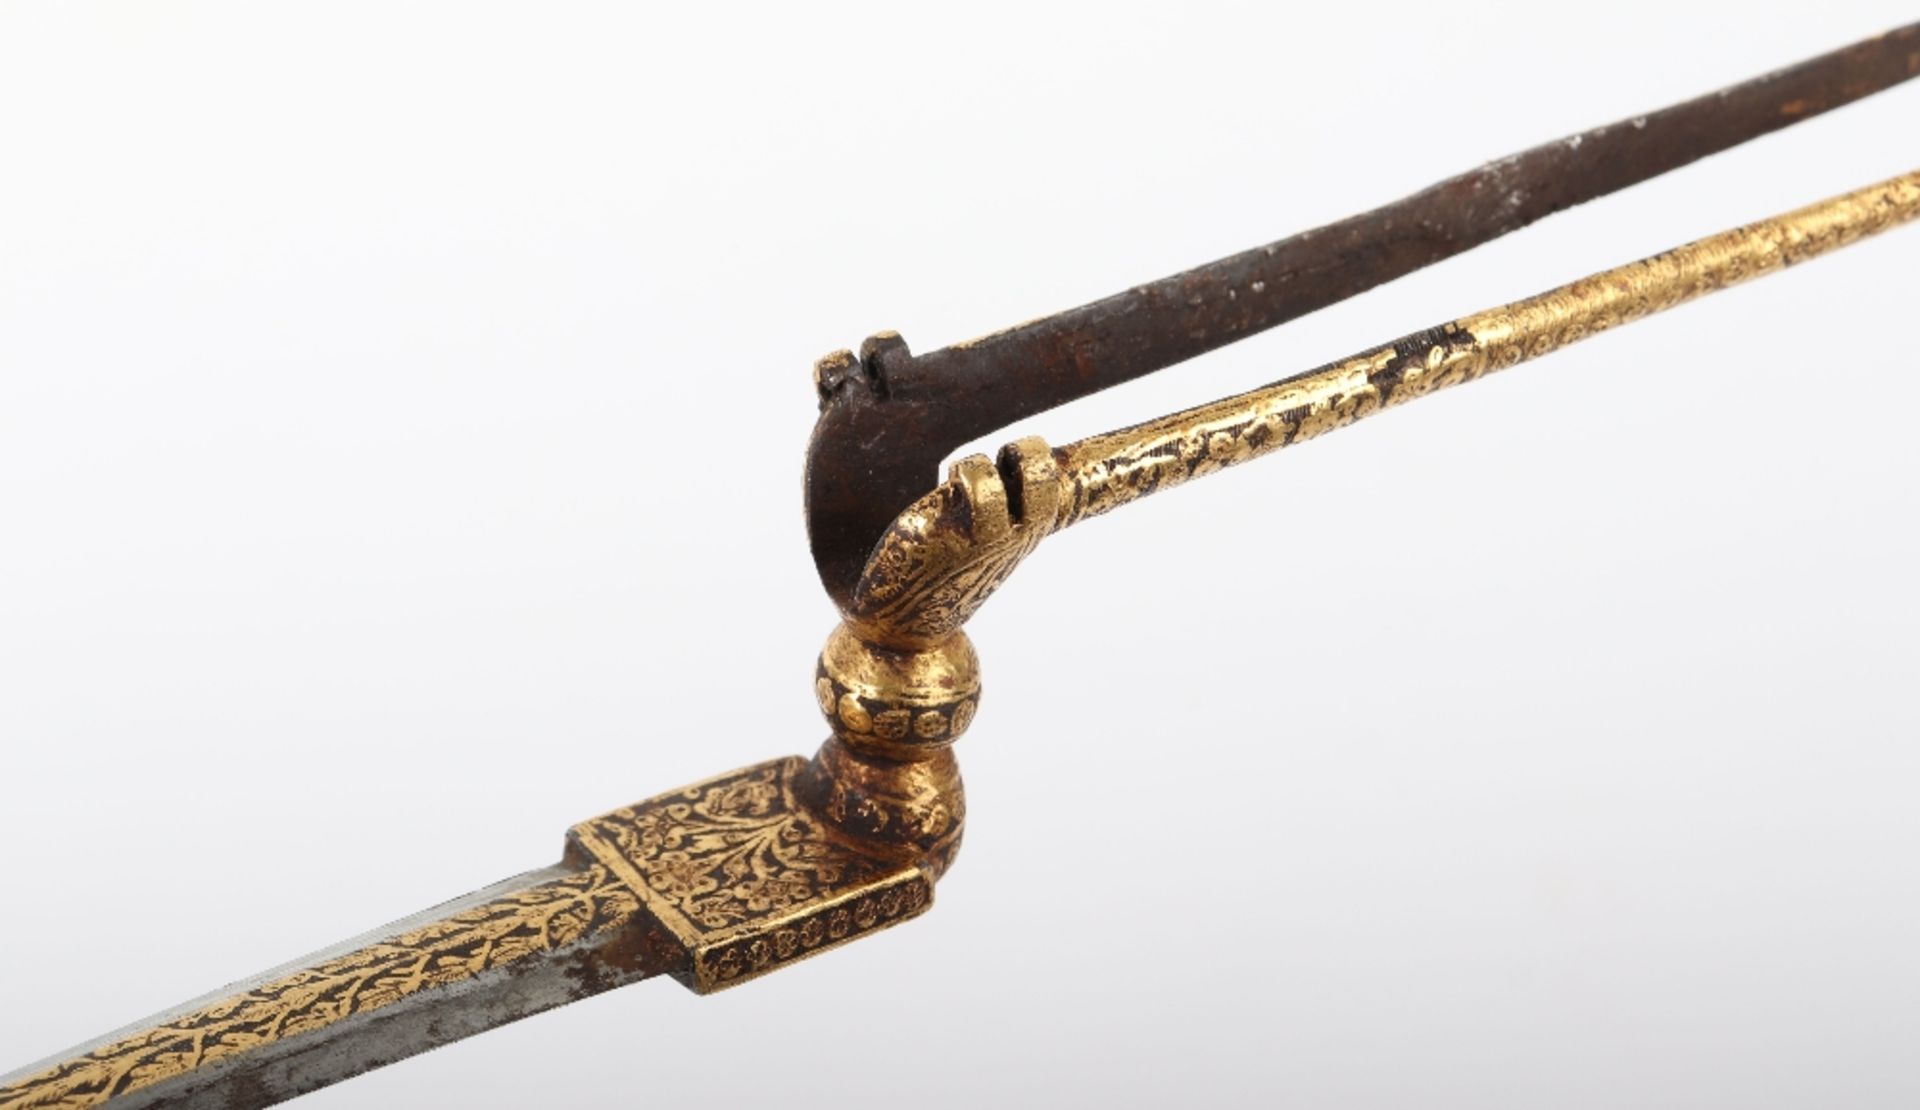 Rare Indian Bayonet Sangin Intended to be Bound to a Matchlock Gun Torador, 18th or 19th Century - Image 5 of 16